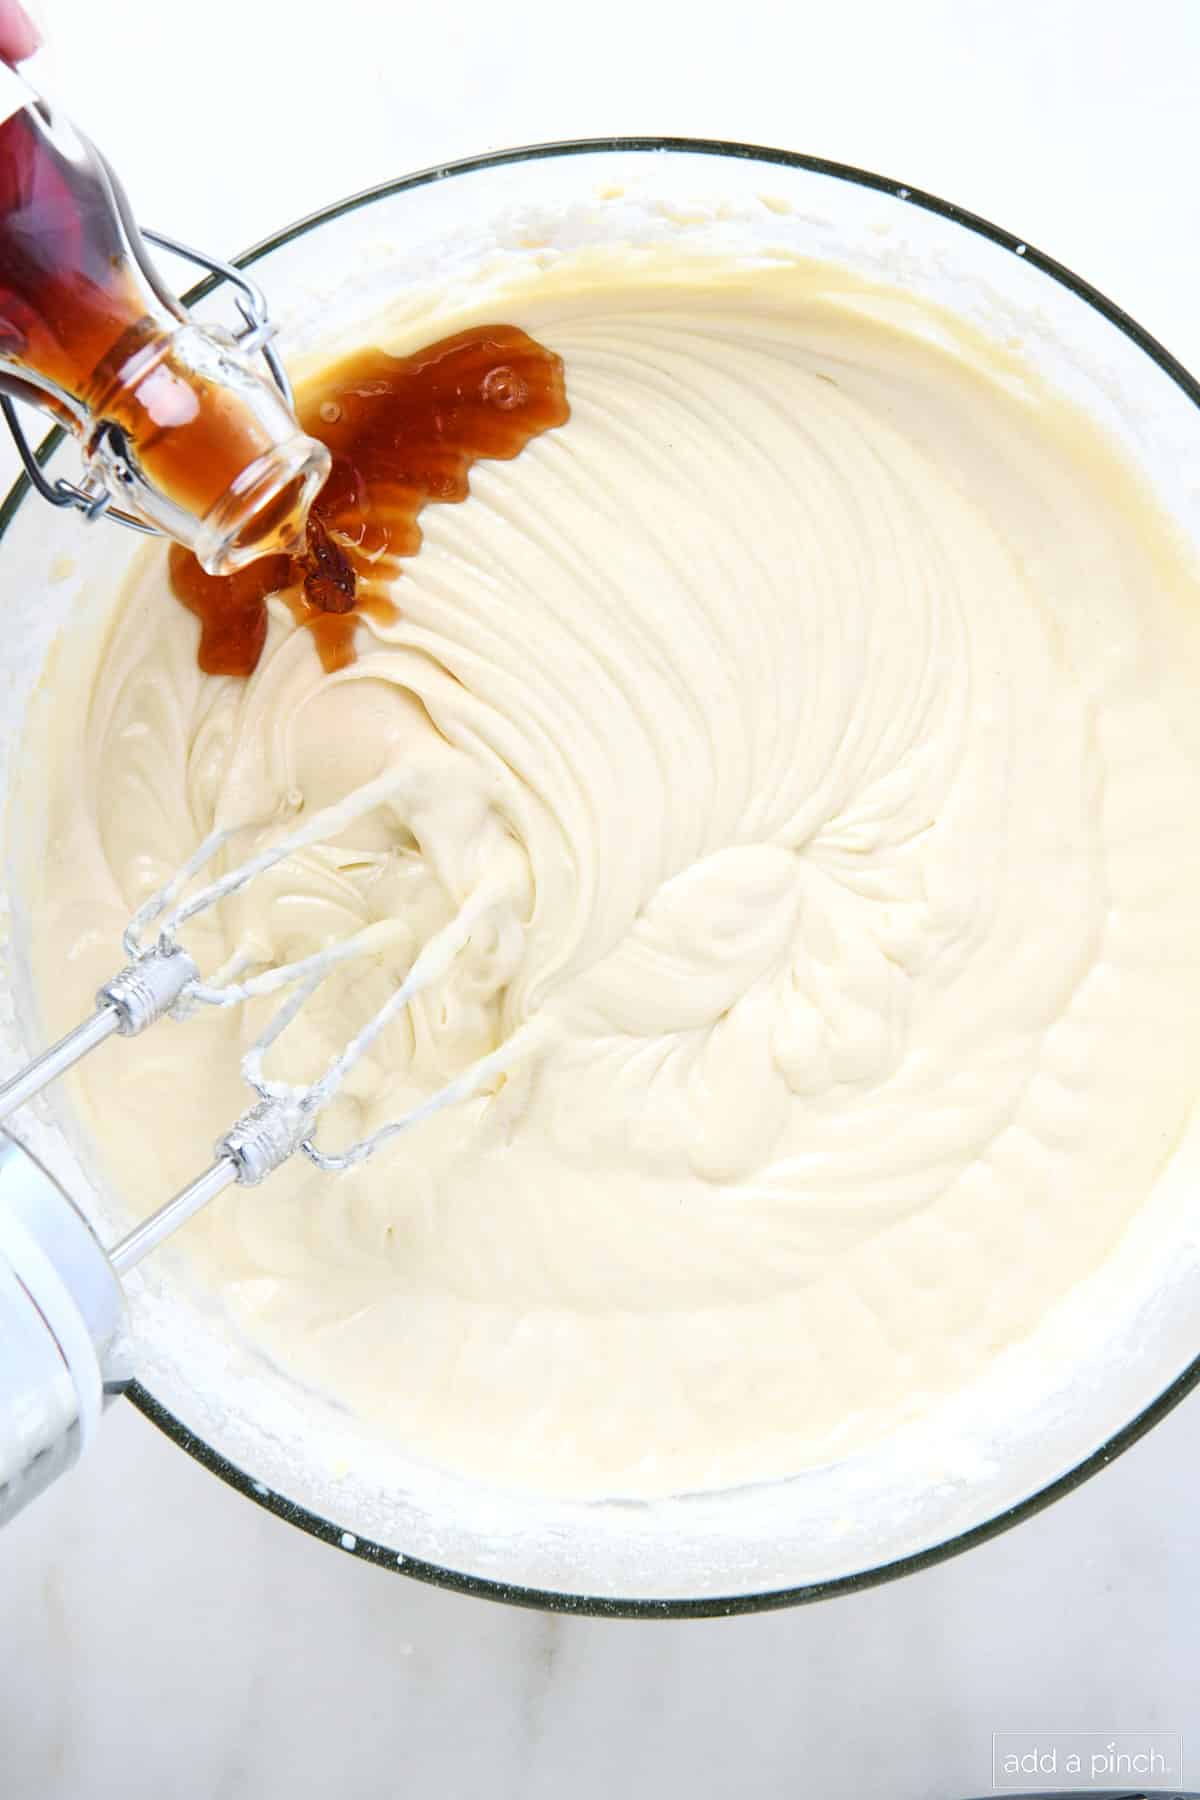 Homemade vanilla extract from a glass bottle is poured into a mixing bowl filled with pound cake batter, ready to combine with the hand mixer.